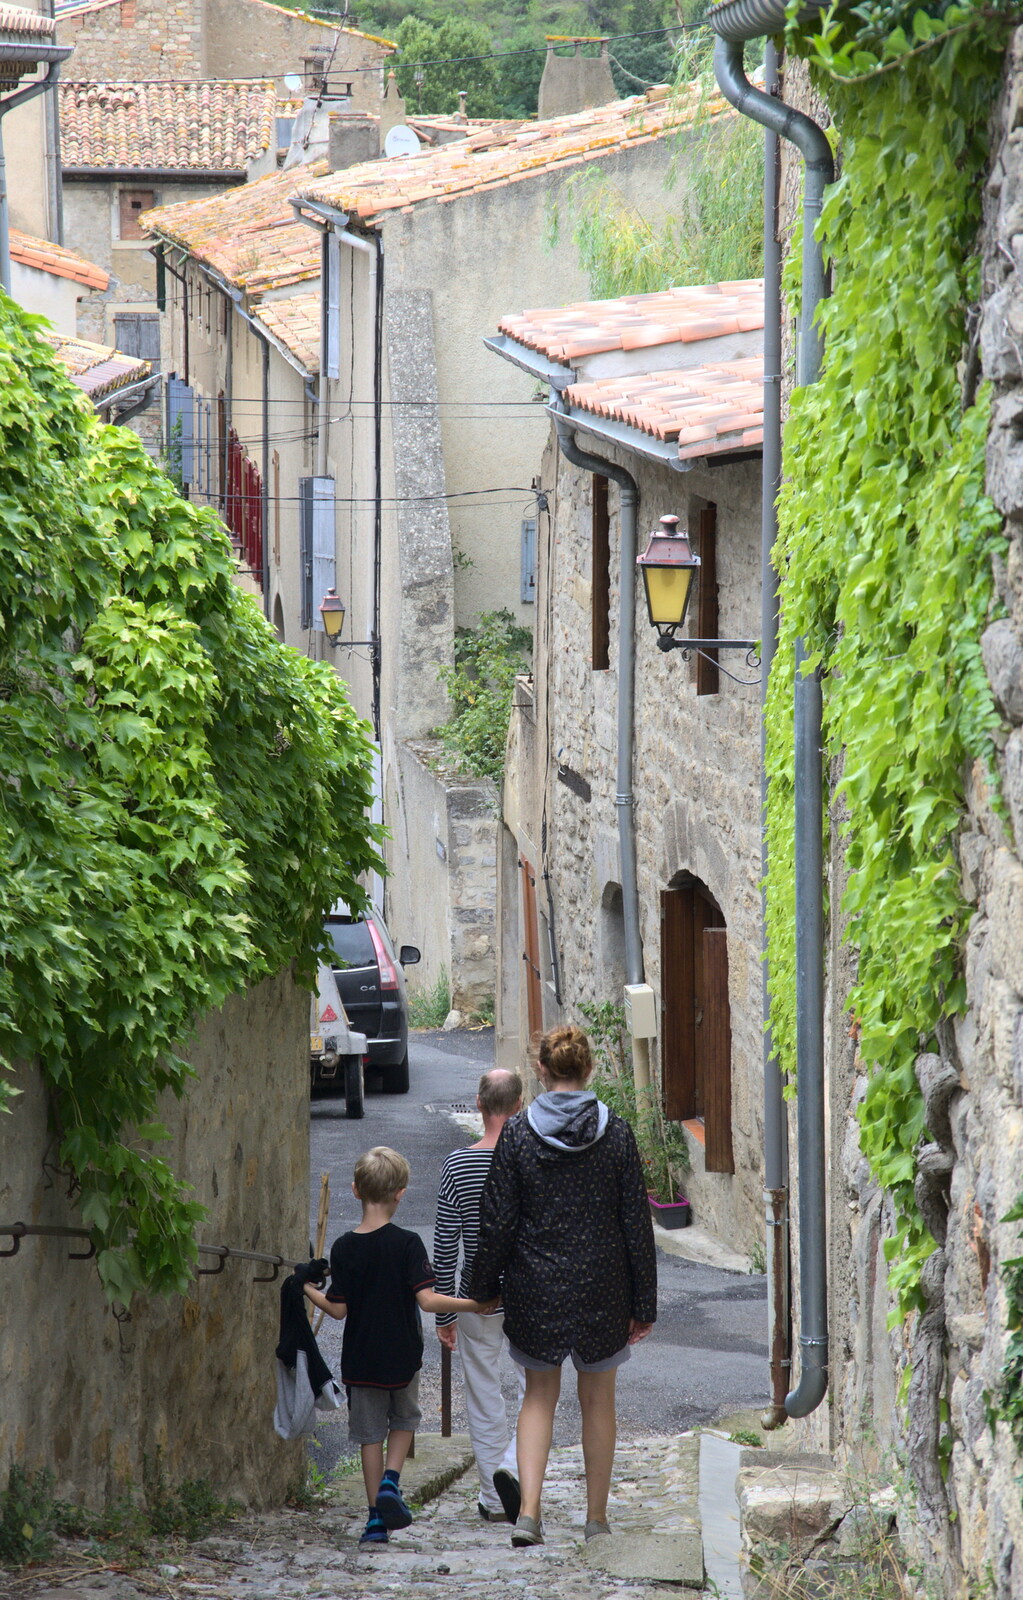 Walking down some steep cobbled streets from Abbaye Sainte-Marie de Lagrasse and The Lac de la Cavayère, Aude, France - 10th August